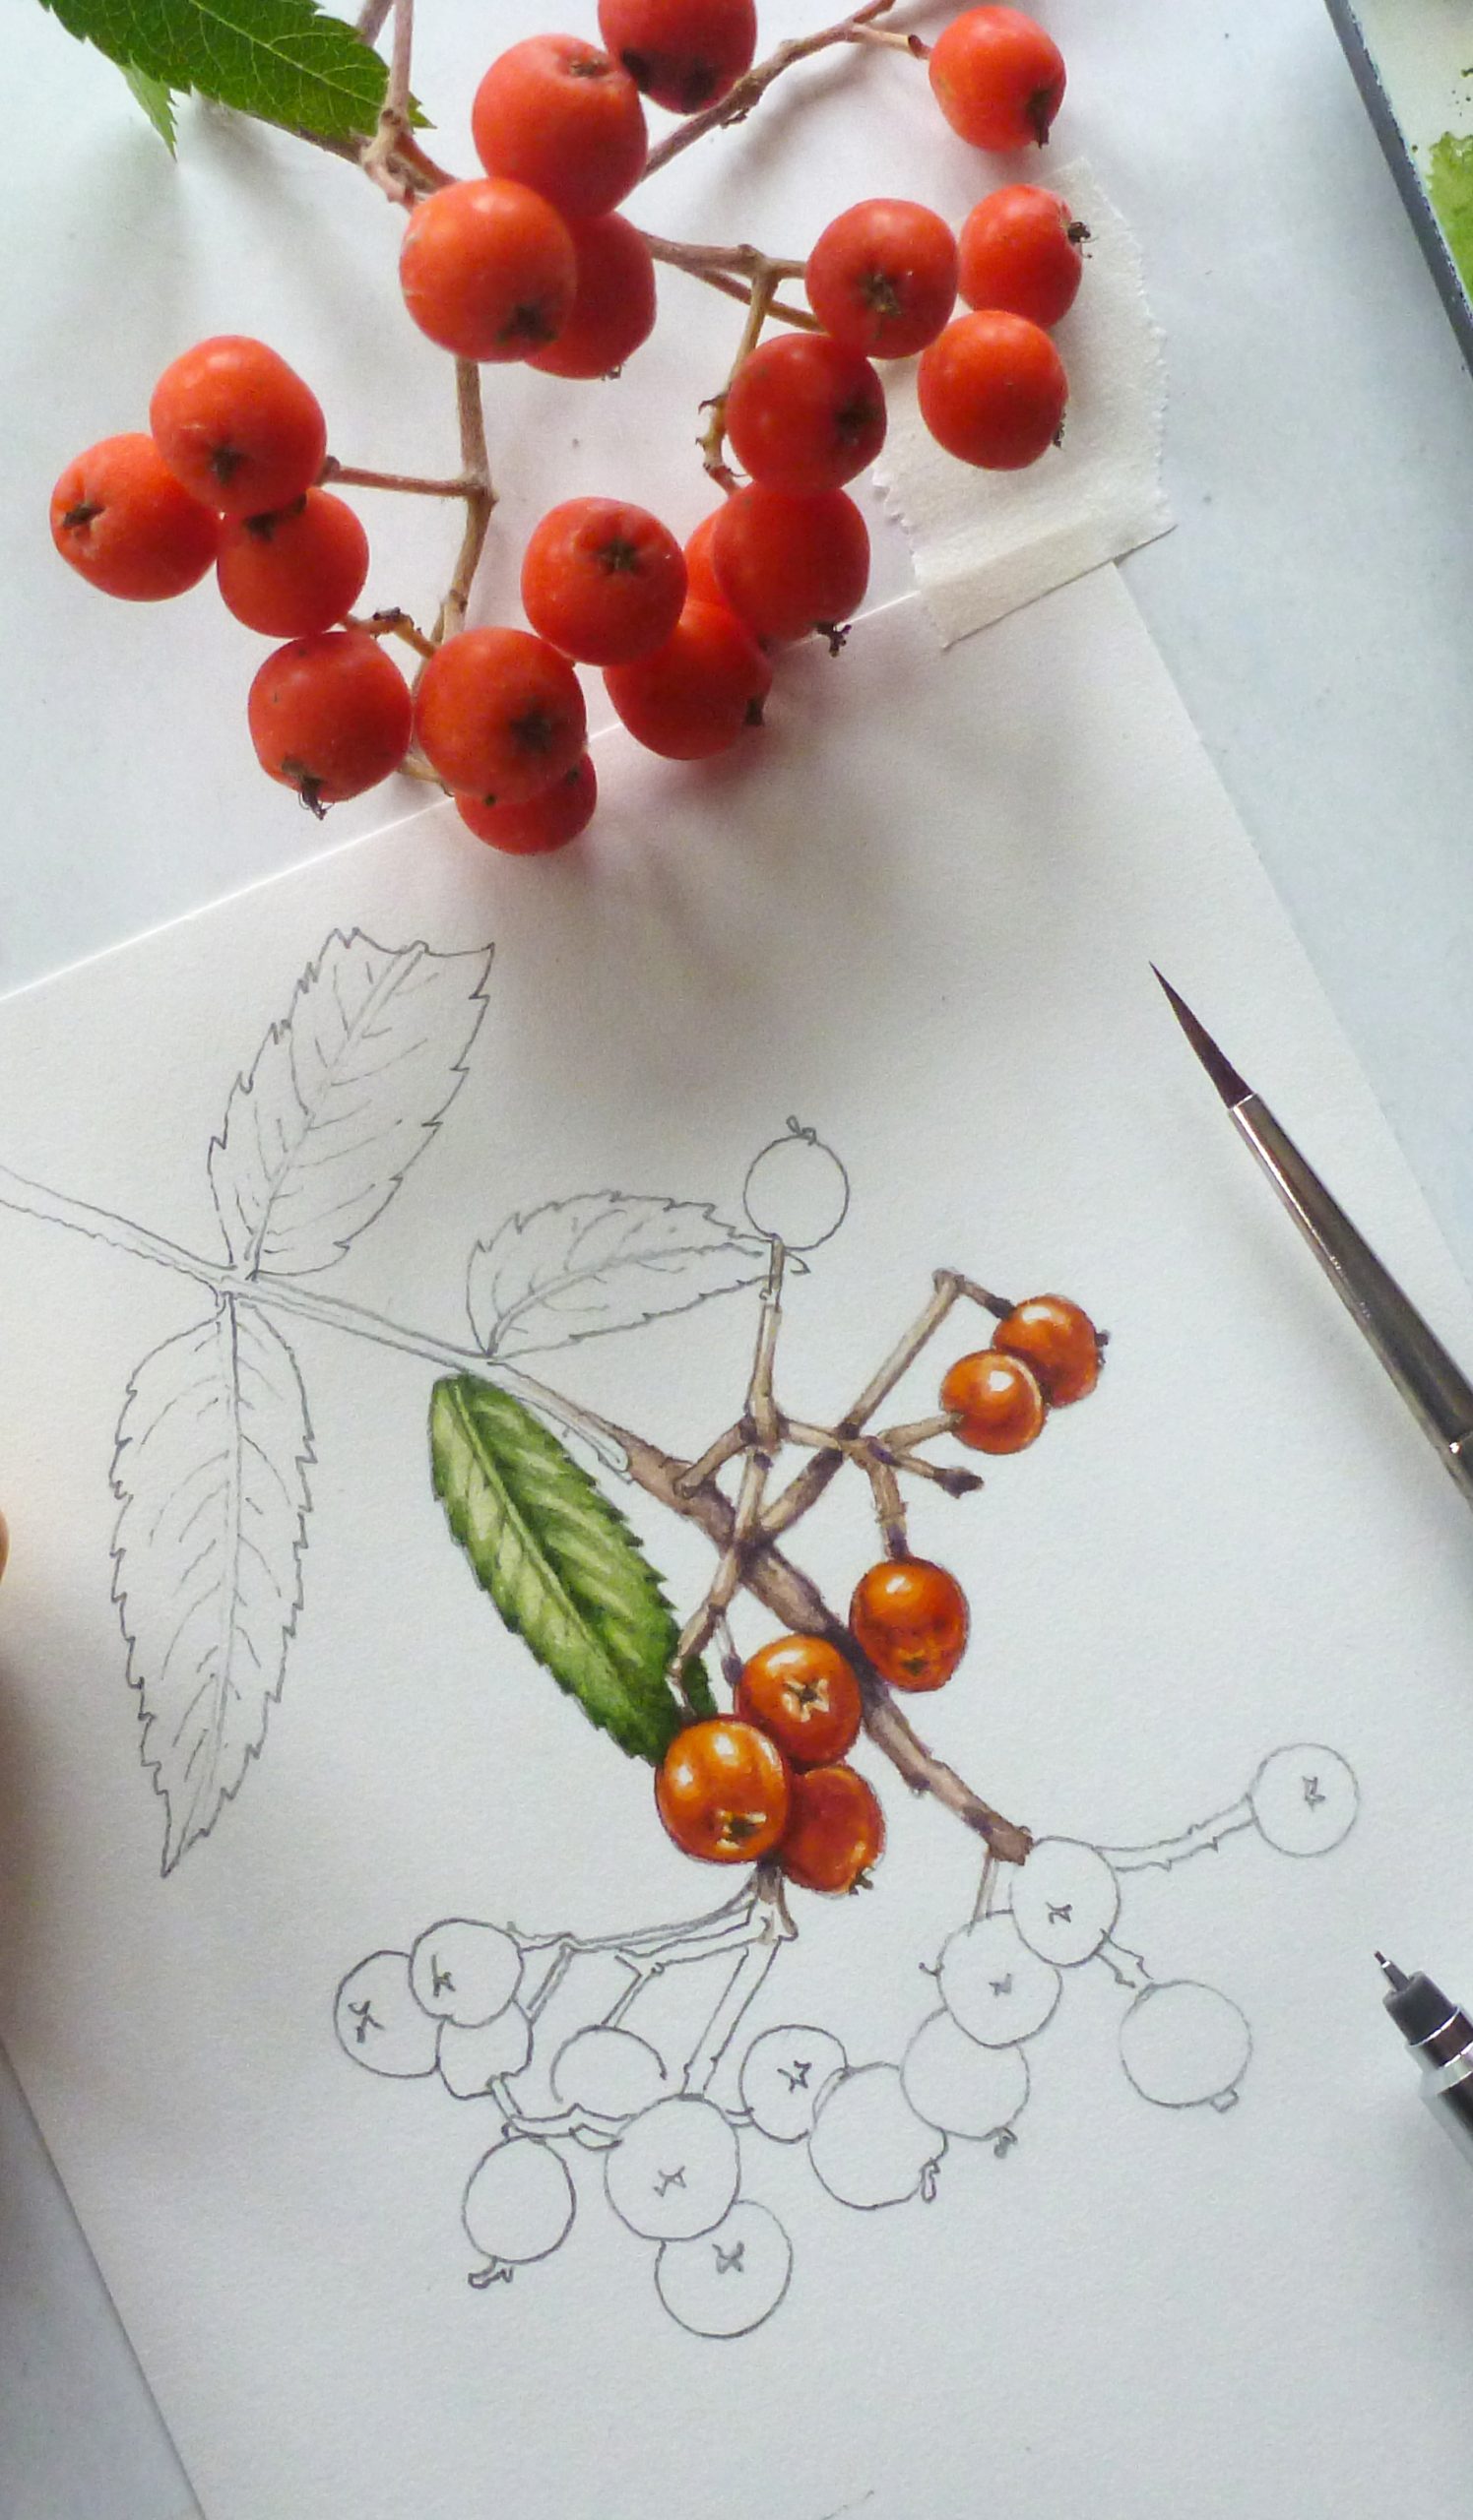 Botanical Illustration: Compound and Simple leaves - Lizzie Harper